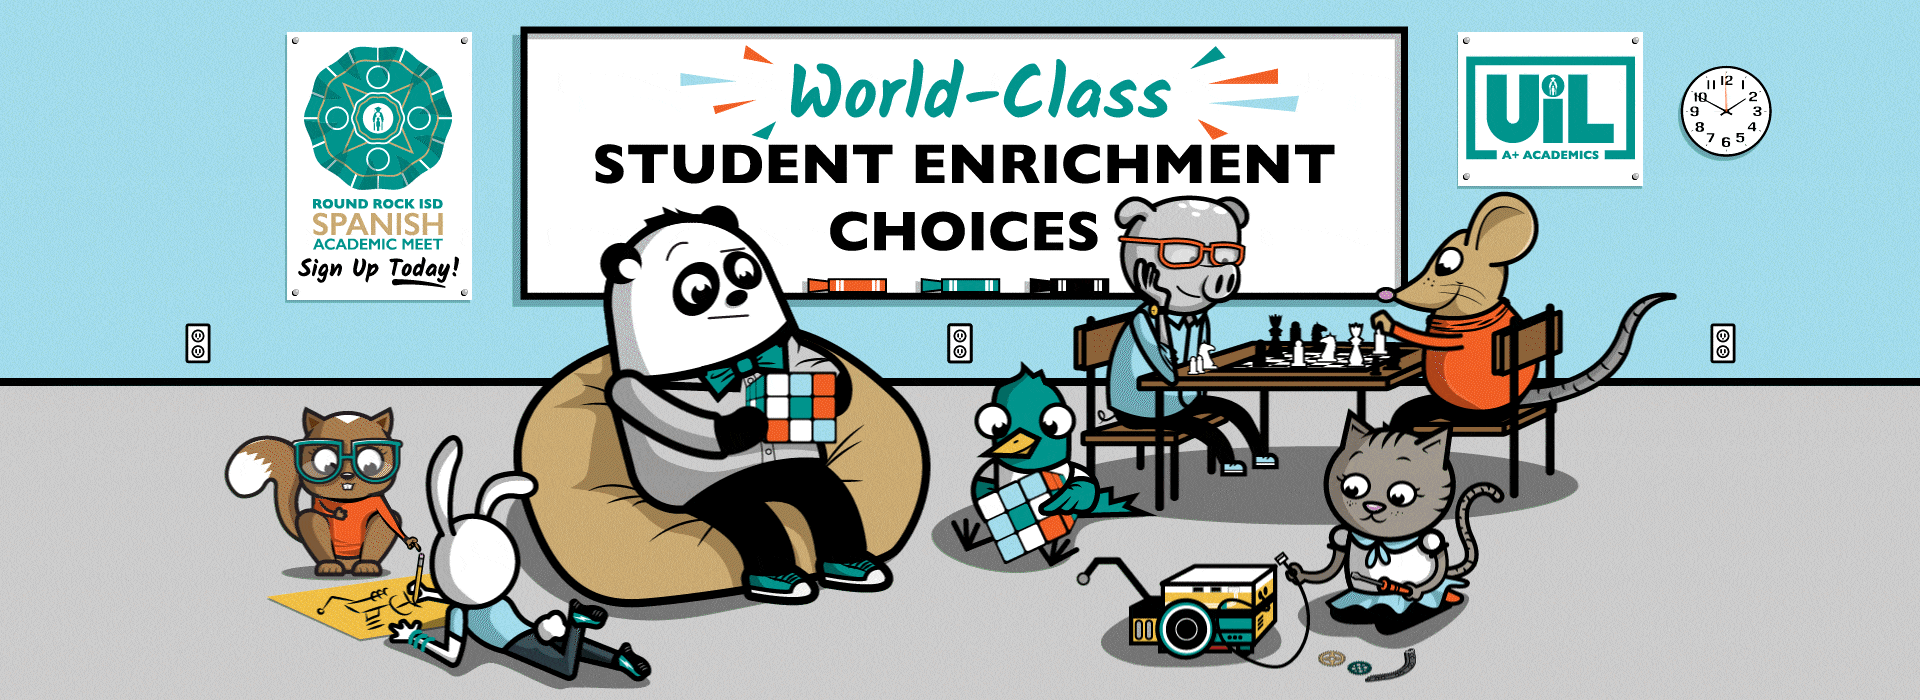 Animated illustration with an anthropomorphic theme. Squirrel and rabbit calculating math problem. Panda and bird solving a cube, cat building a robot, big and mouse playing checkers. World Class student enrichment banner in the background on a white board.